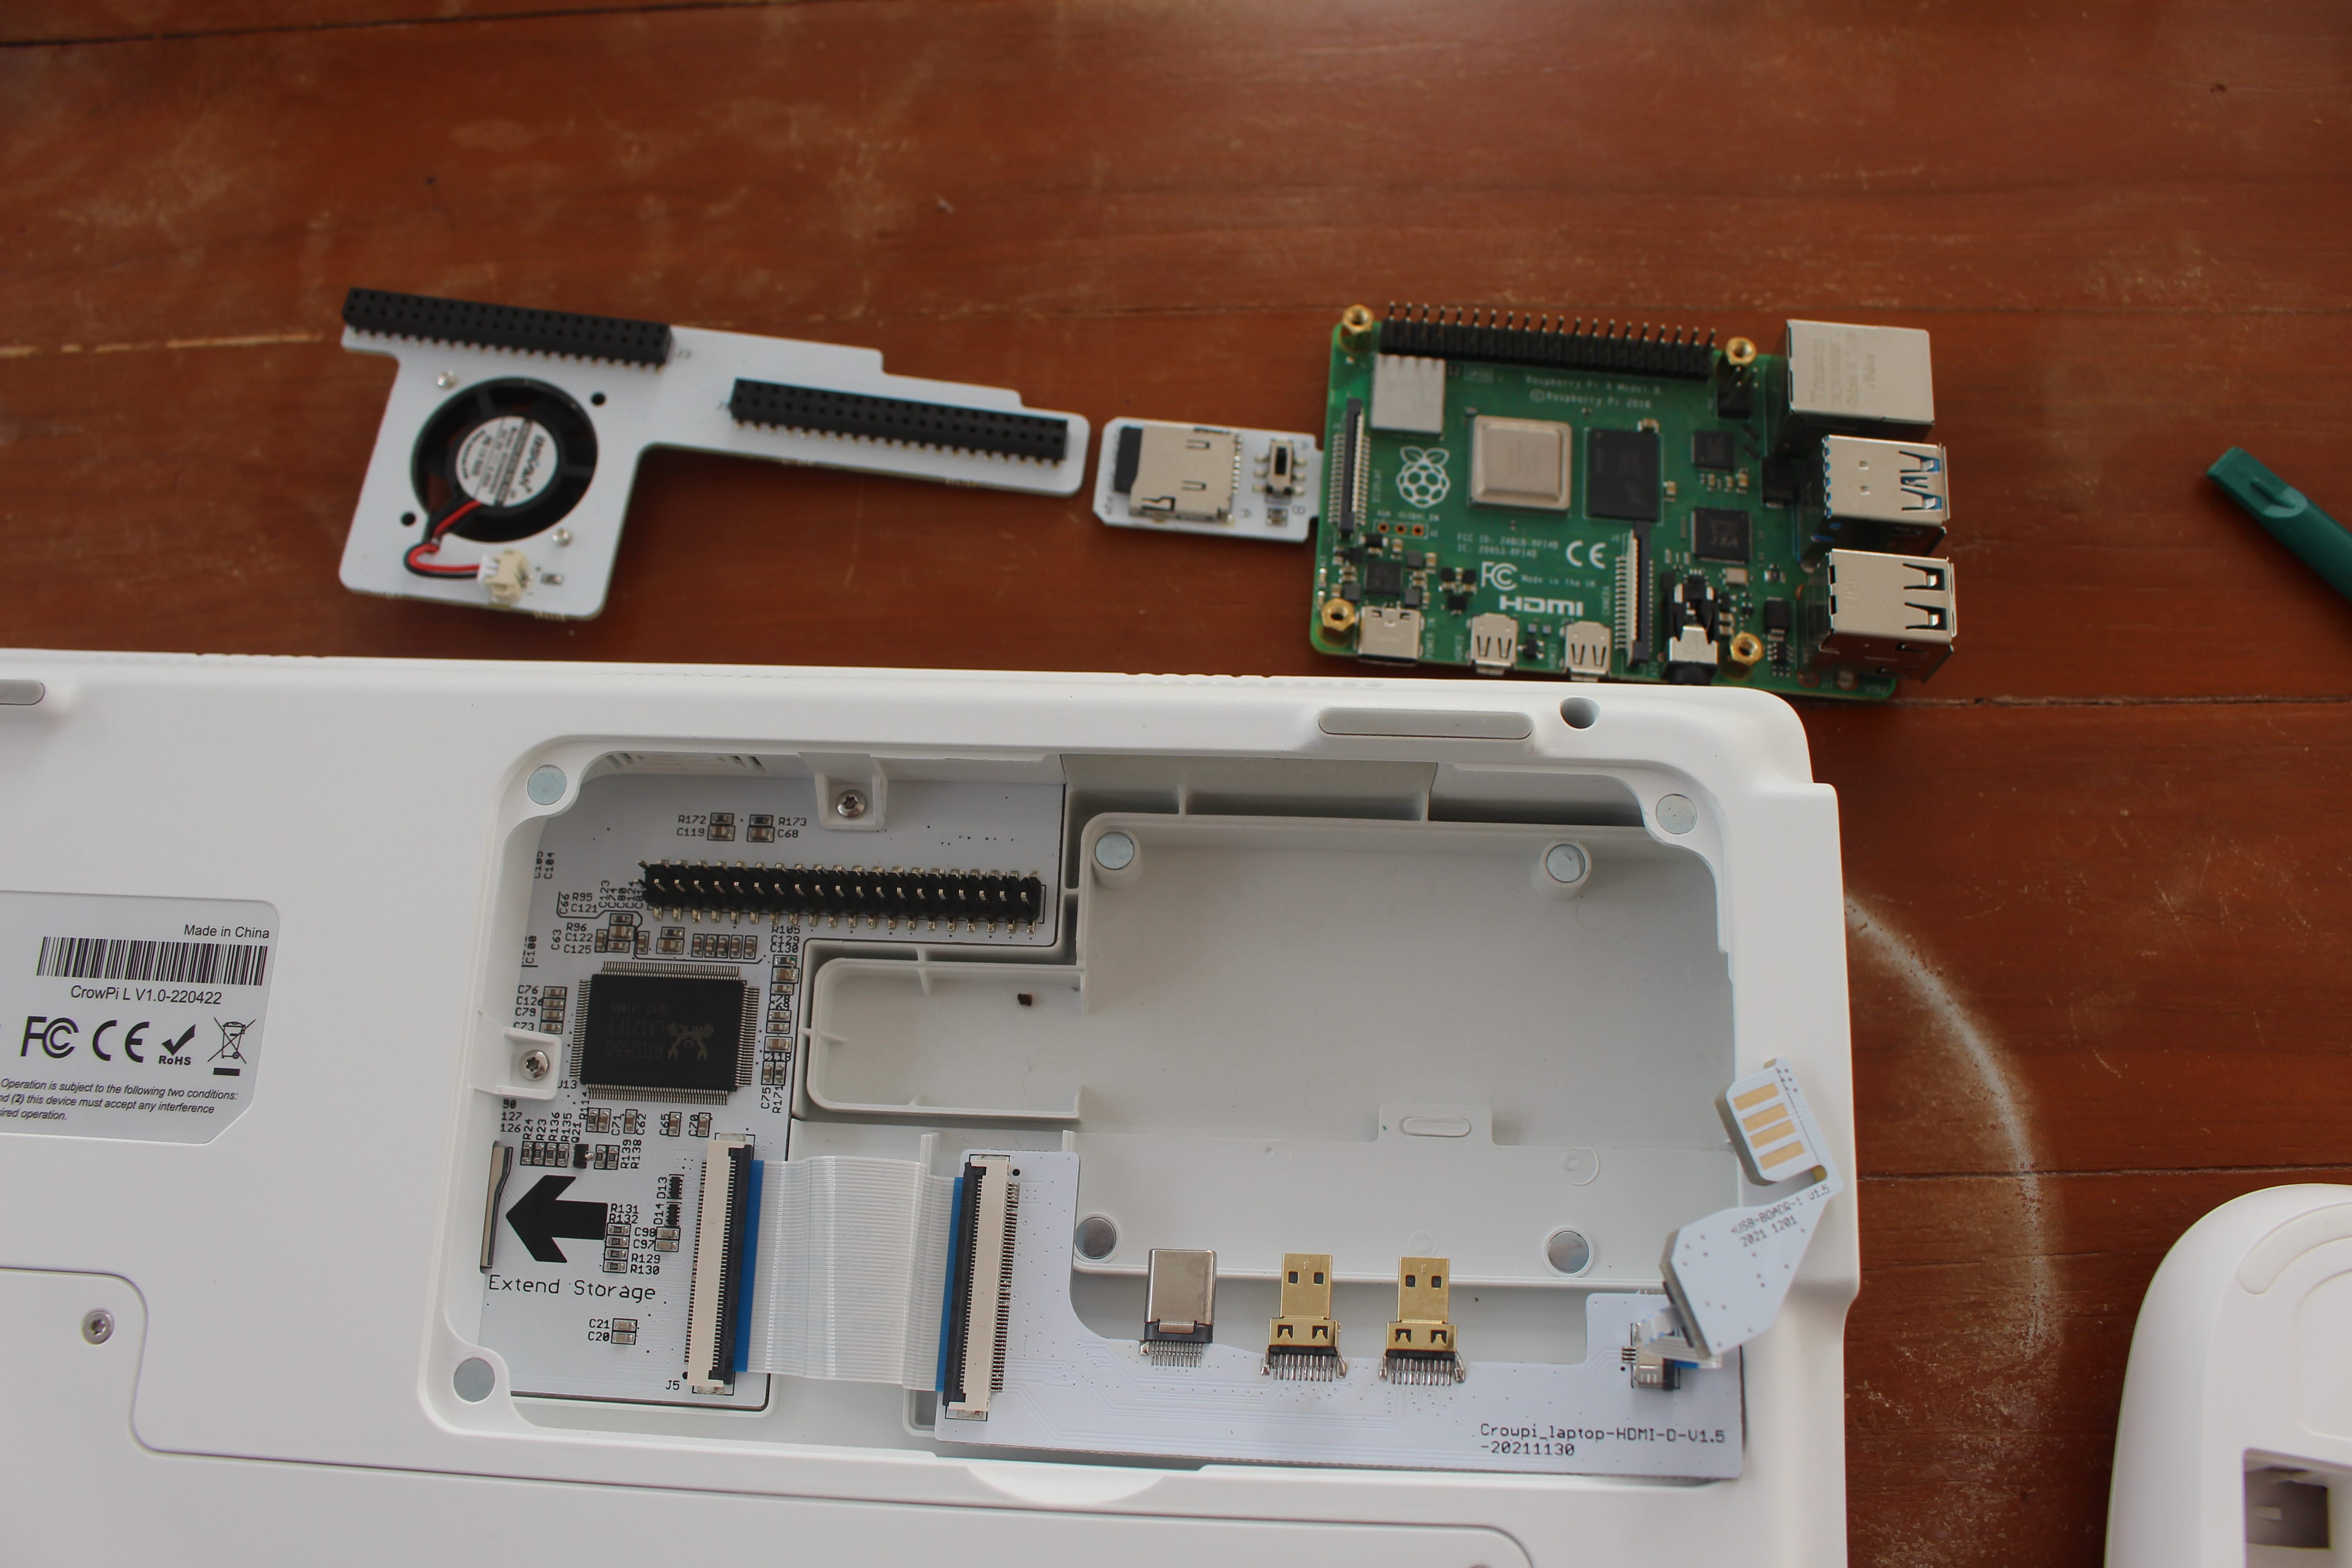 CrowPi L Raspberry Pi 4 laptop review - Part 1: Unboxing and